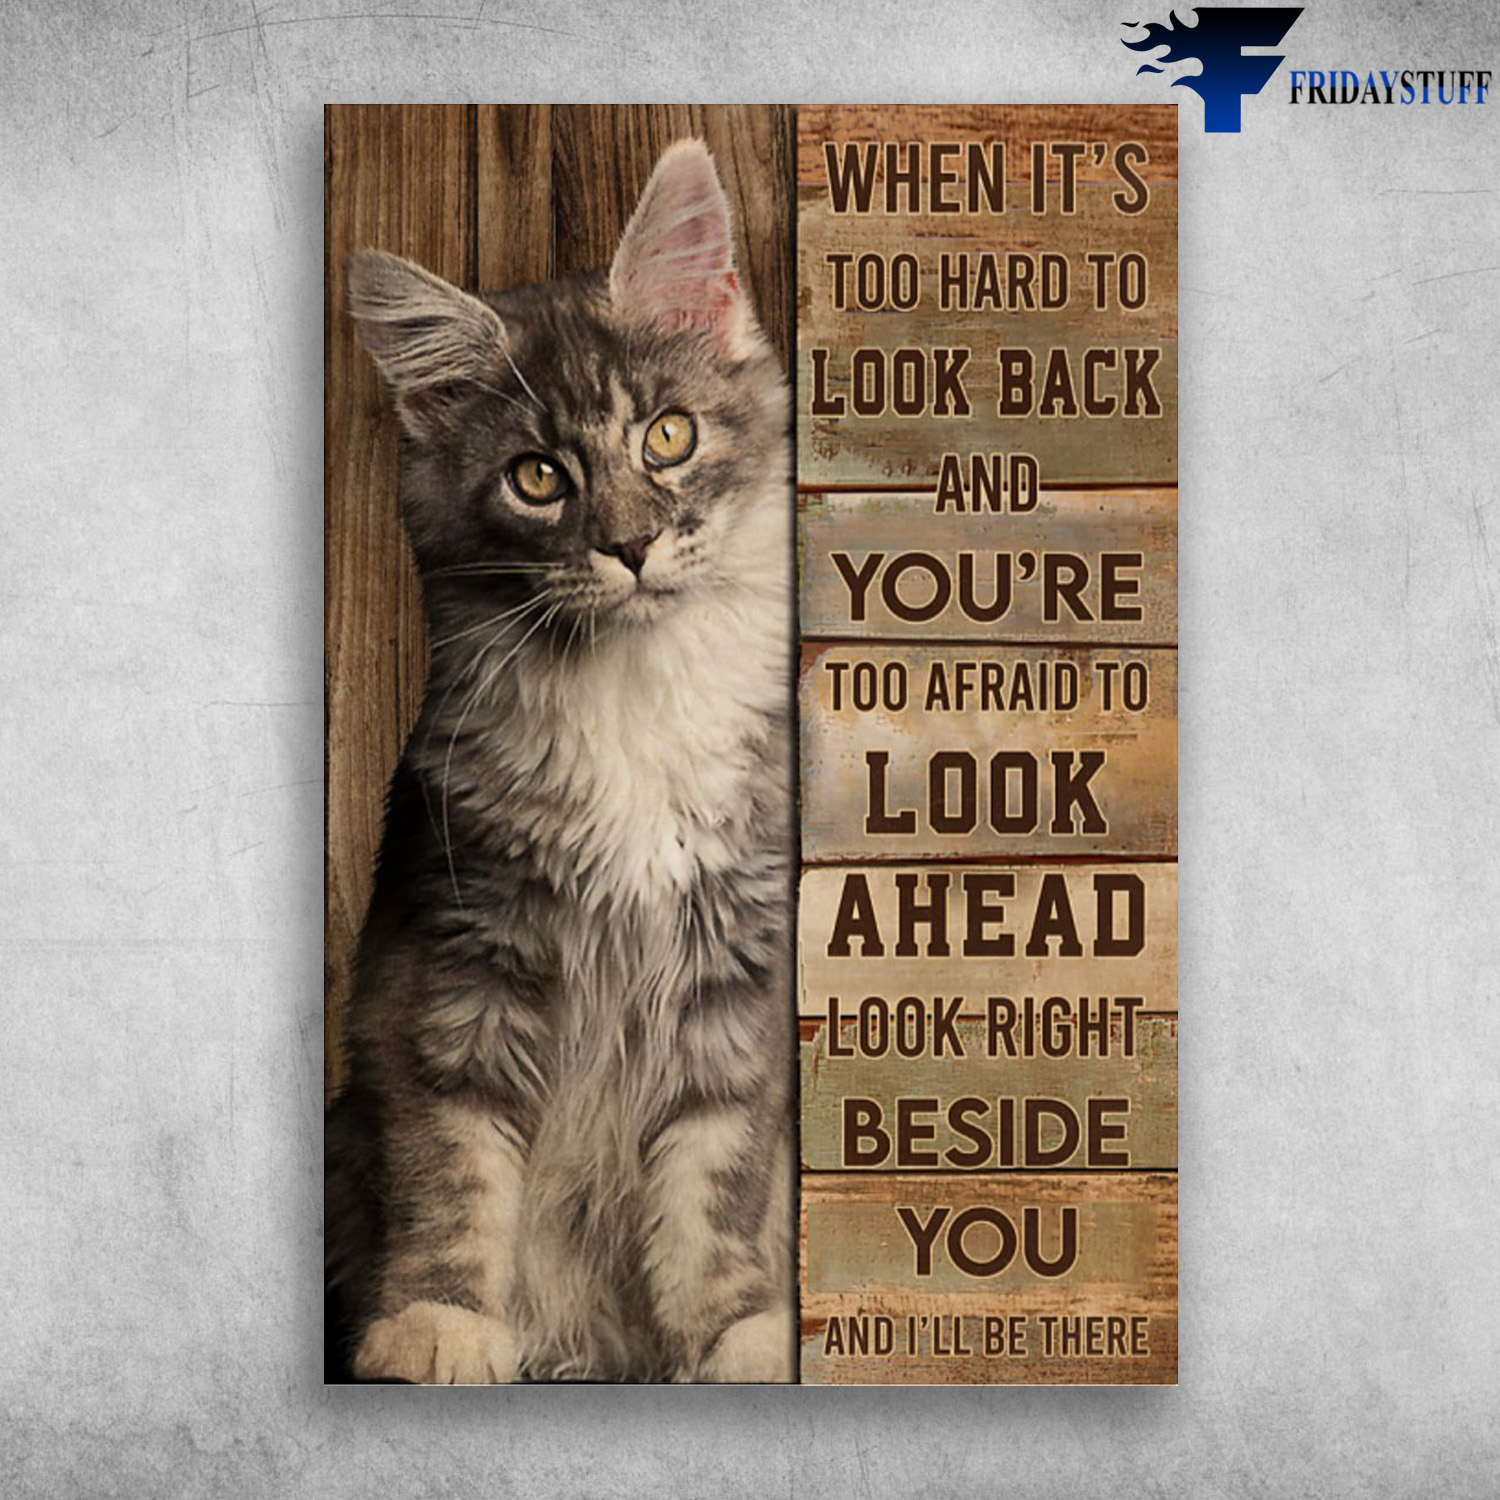 Maine Coon Cat - When It's Too Hard To Look Back, And You're Too Afraid To Look Ahead, Look Right Beside You, And I'll Be There